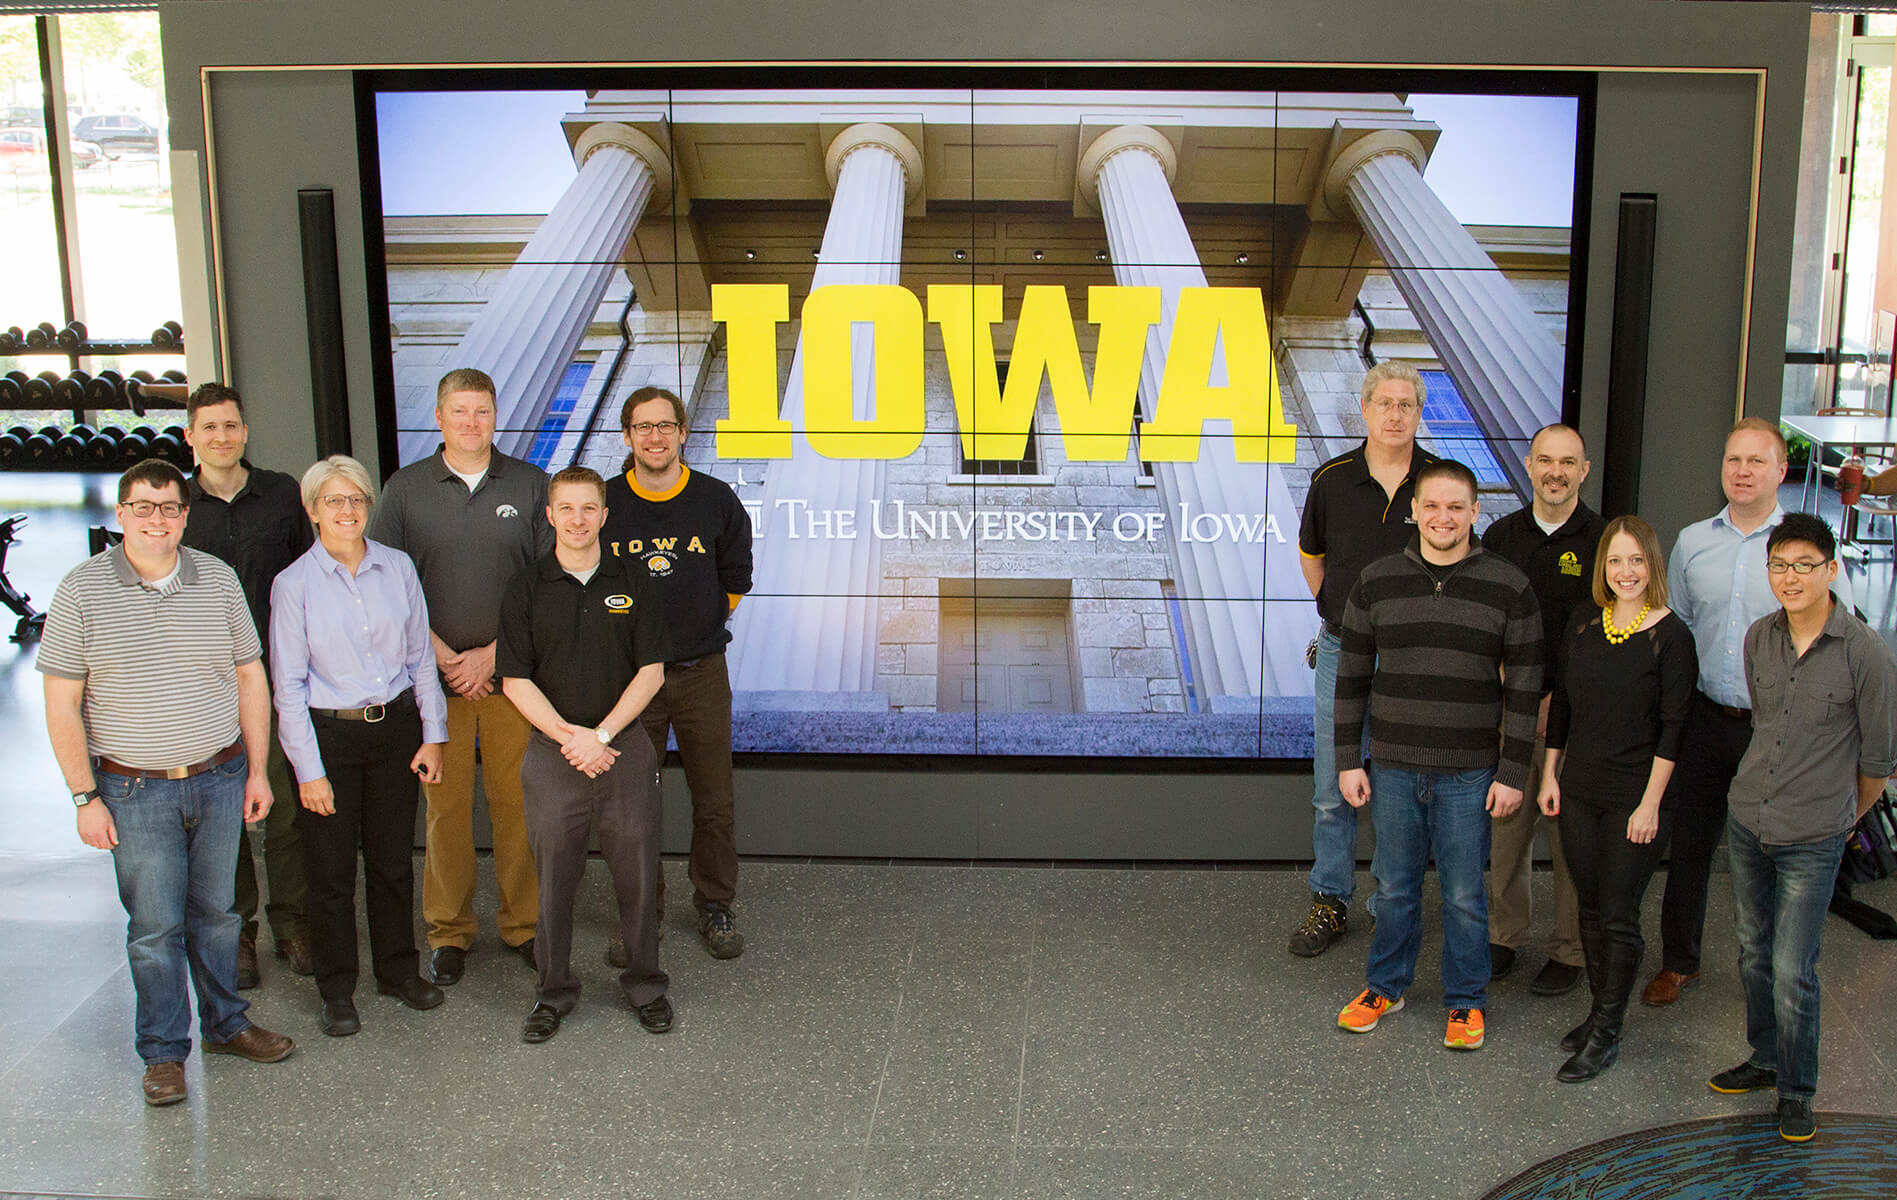 People standing at the sides of the screen showing the pillars and the word IOWA